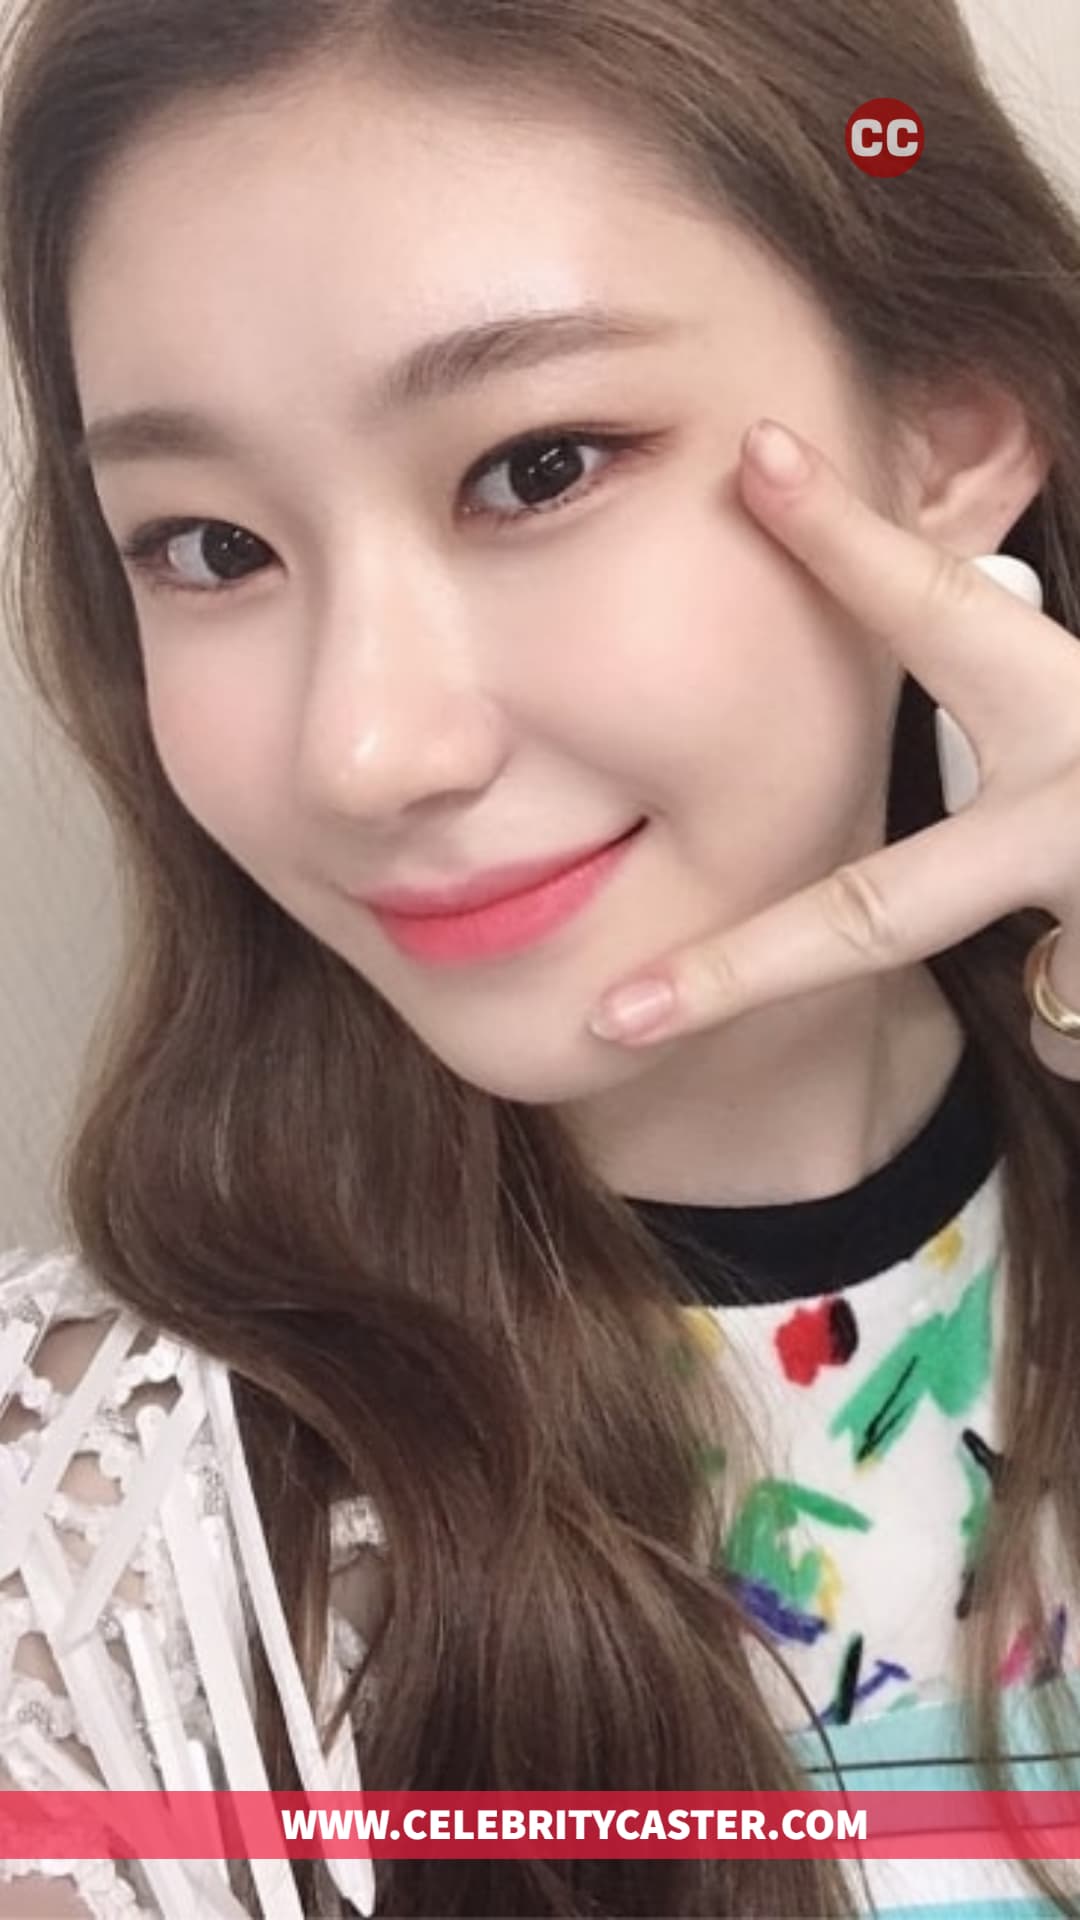 Beautiful South Korean Singer, Chaeryeong age, Chaeryeong Body Statistics, Chaeryeong ITZY height, Chaeryeong ITZY Measurements, Chaeryeong weight, Female Singers, Female South Korean Singers, ITZY, ITZY Members, Most Beautiful Girls from South Korea, South Korea, South Korean Celebrities, South Korean Dancers, South Korean Girl Group, South Korean Girls, South Korean Girls Band, South Korean Music Group, South Korean Rappers, South Korean Women, TV Personality, Vocalist